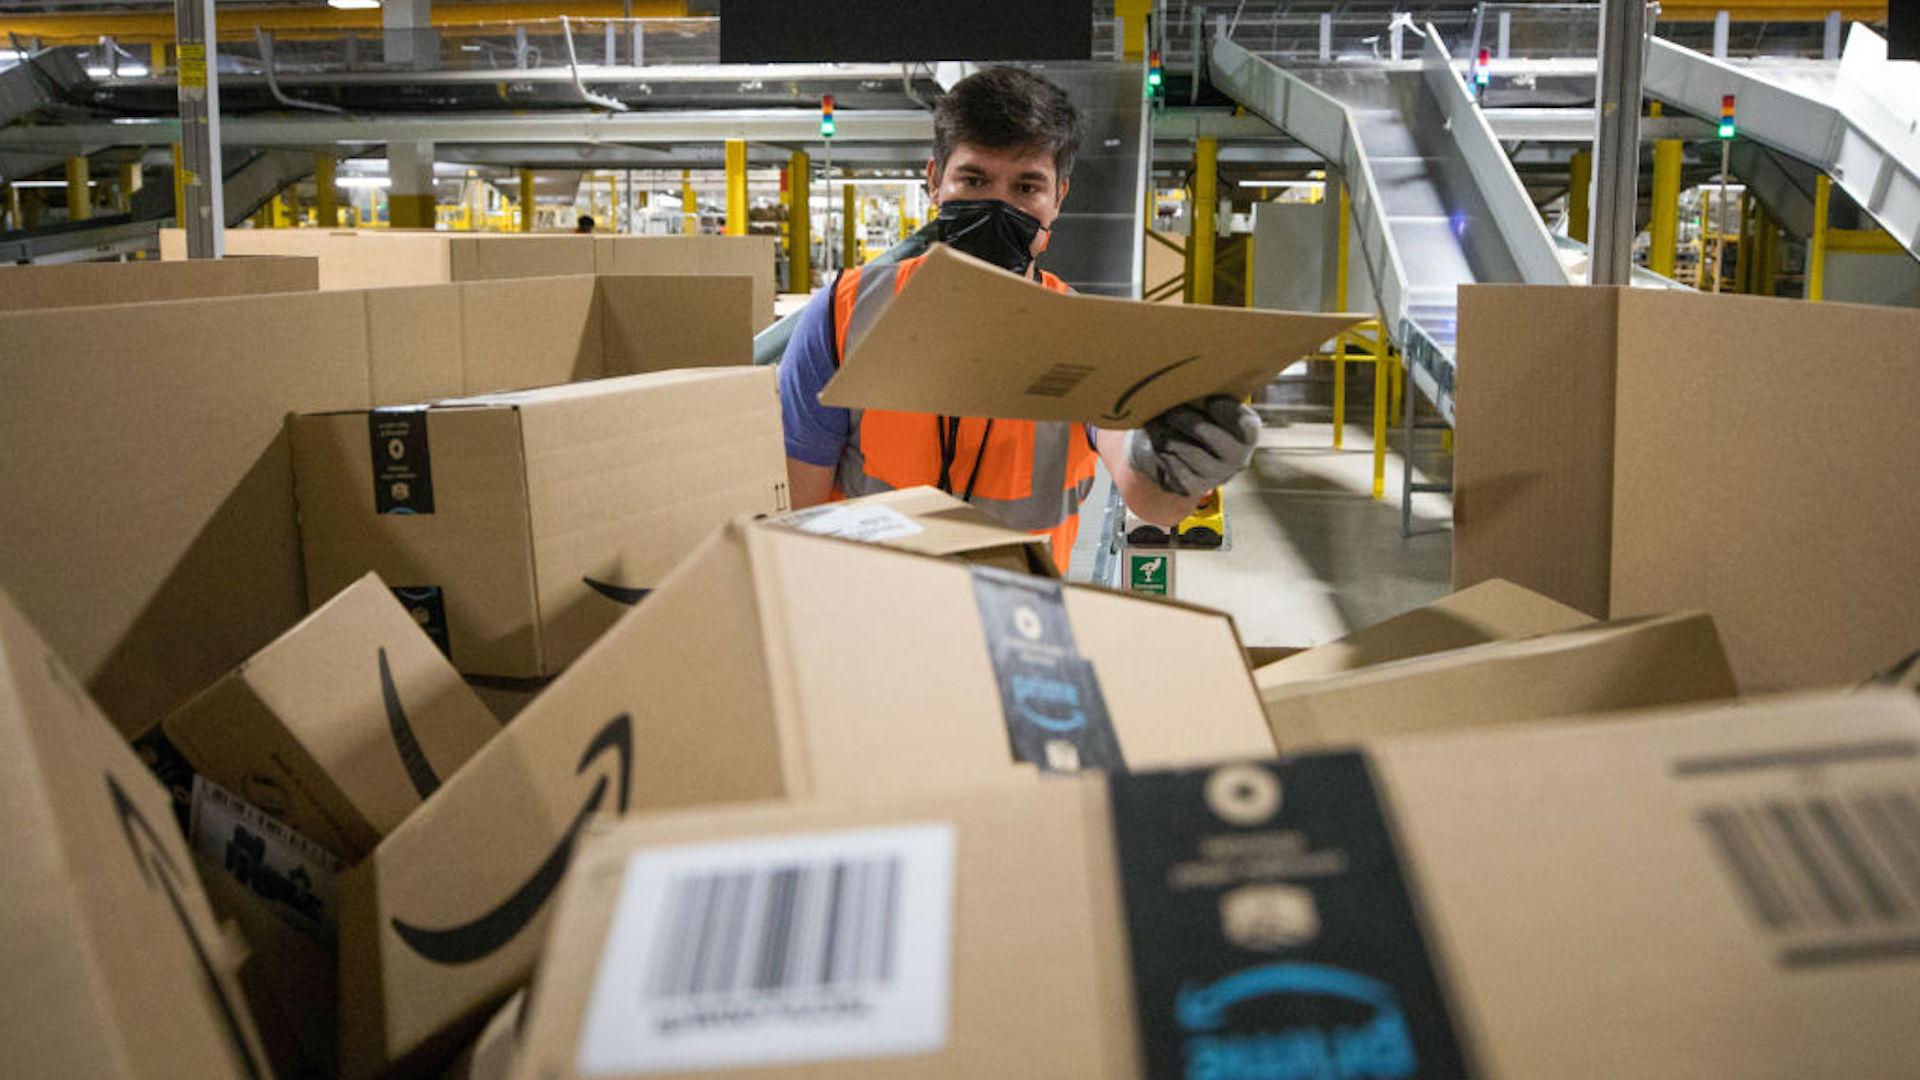 An employee places a package into a distribution box at an Amazon.com Inc. fulfilment center in Kegworth, U.K., on Monday, Oct. 12, 2020.